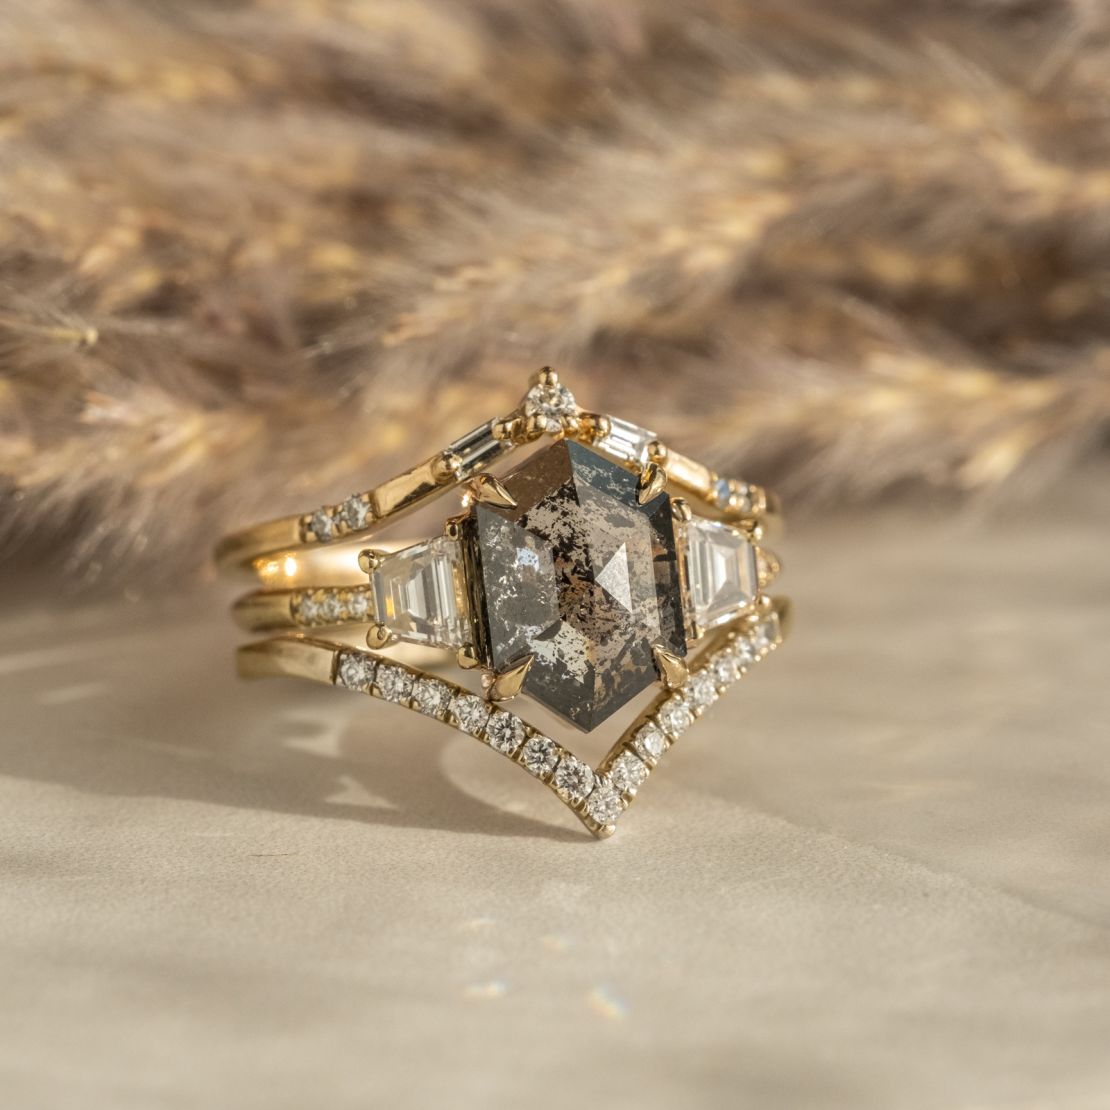 Colored gemstones and 'imperfect' diamonds: Non-traditional engagement rings  are here to stay